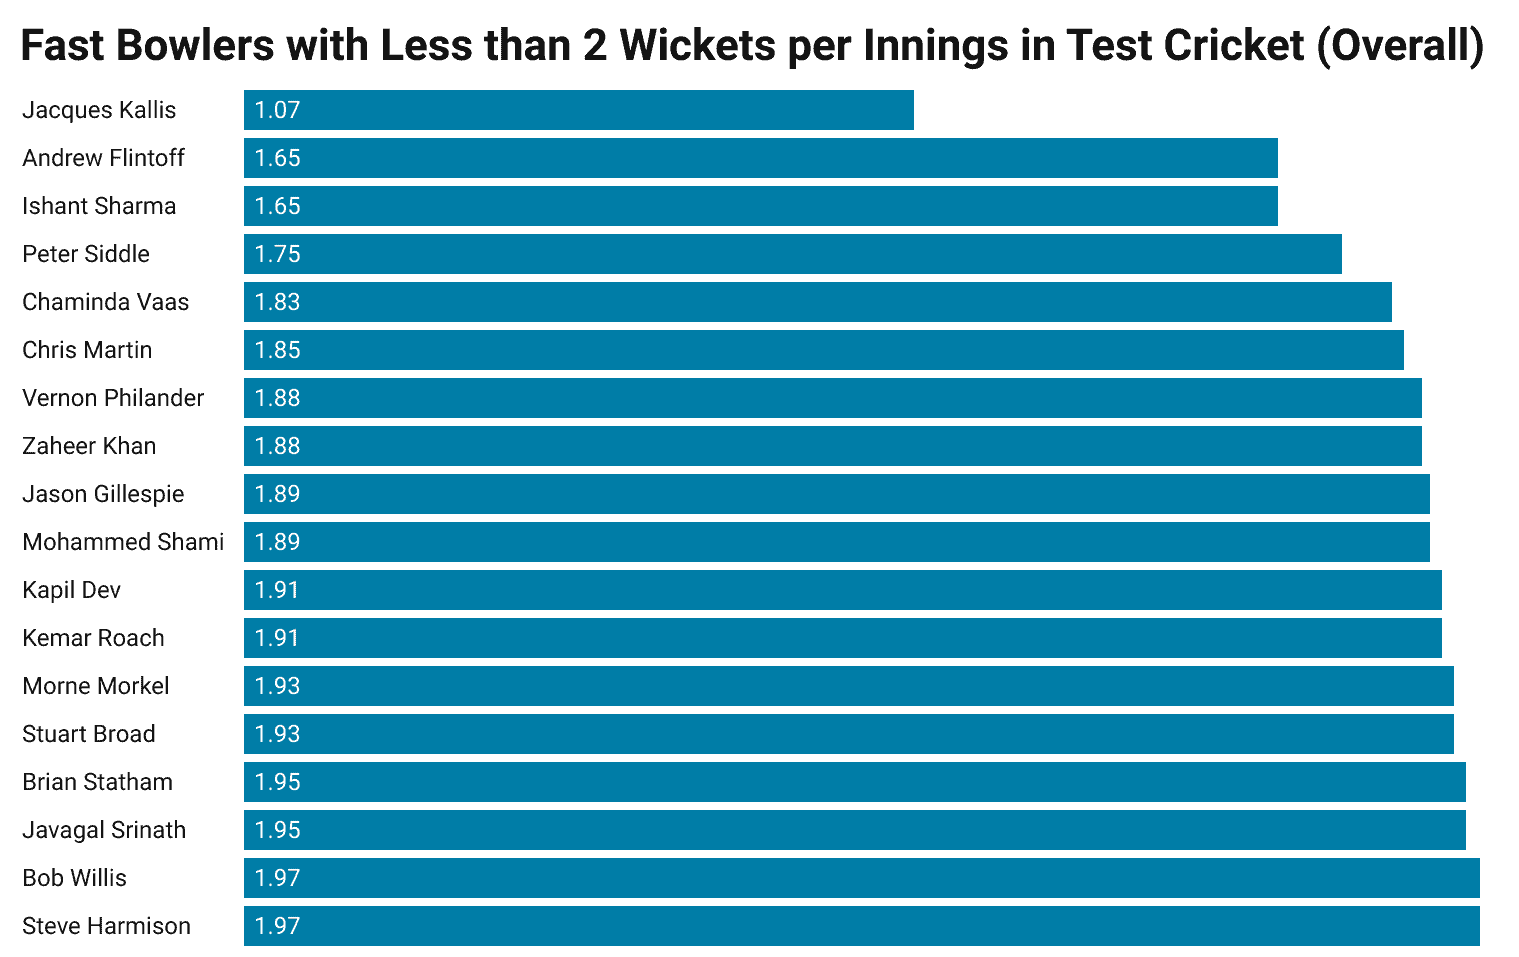 Fast Bowlers with Less than 2 Wickets per Innings in Test Cricket in Overall Matches